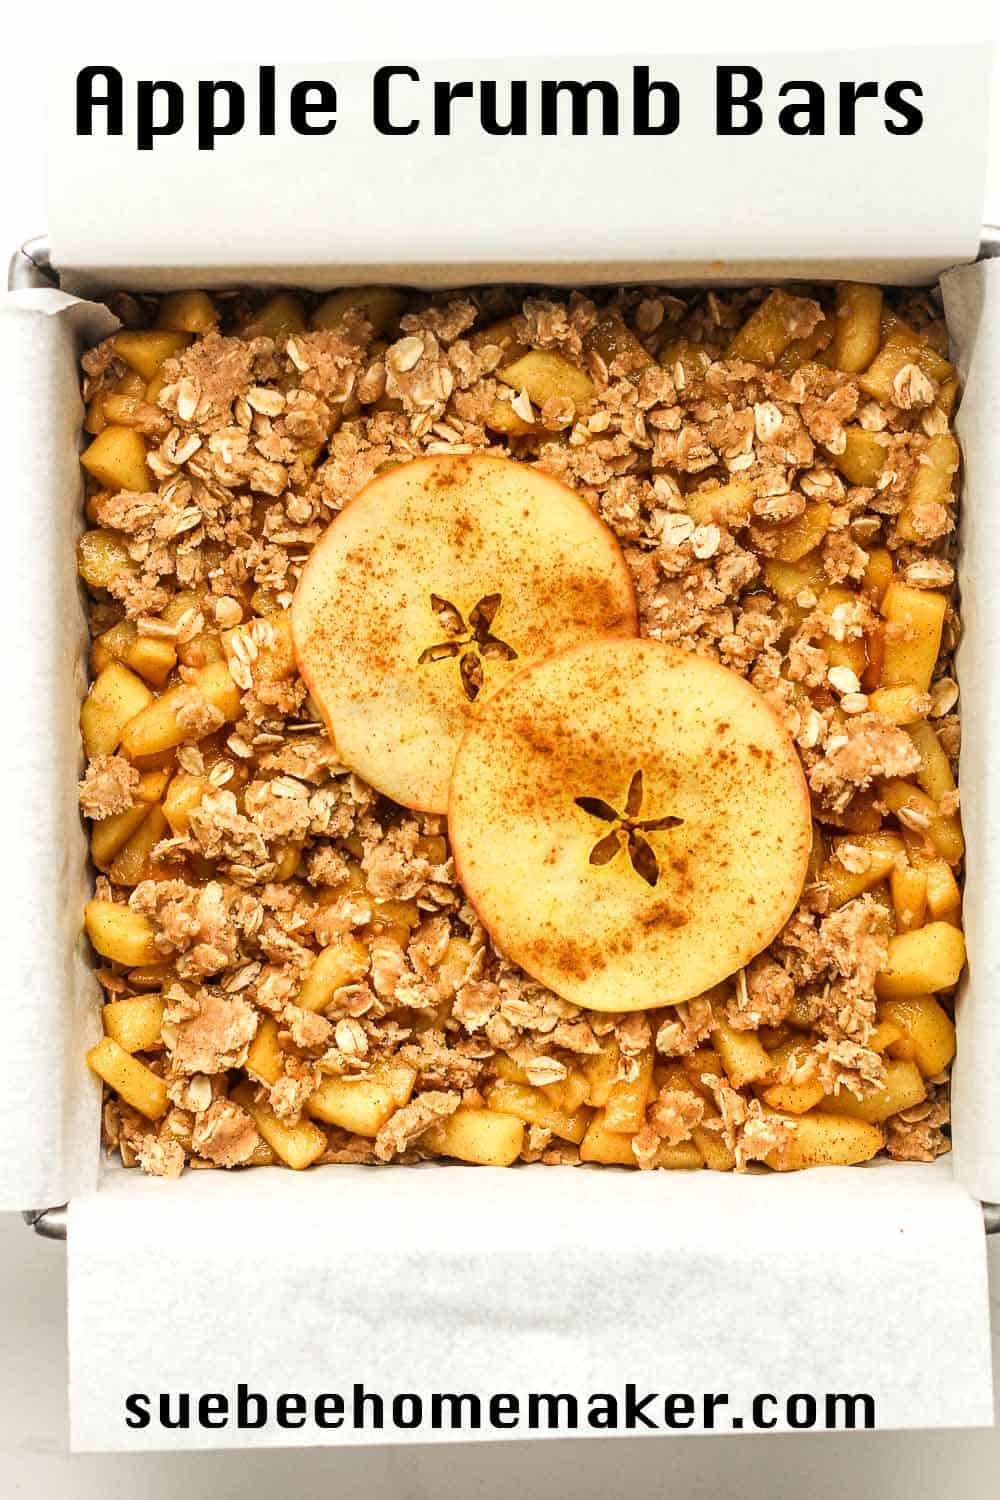 The prepped apple crumb bars in a square pan with apple slices on top.